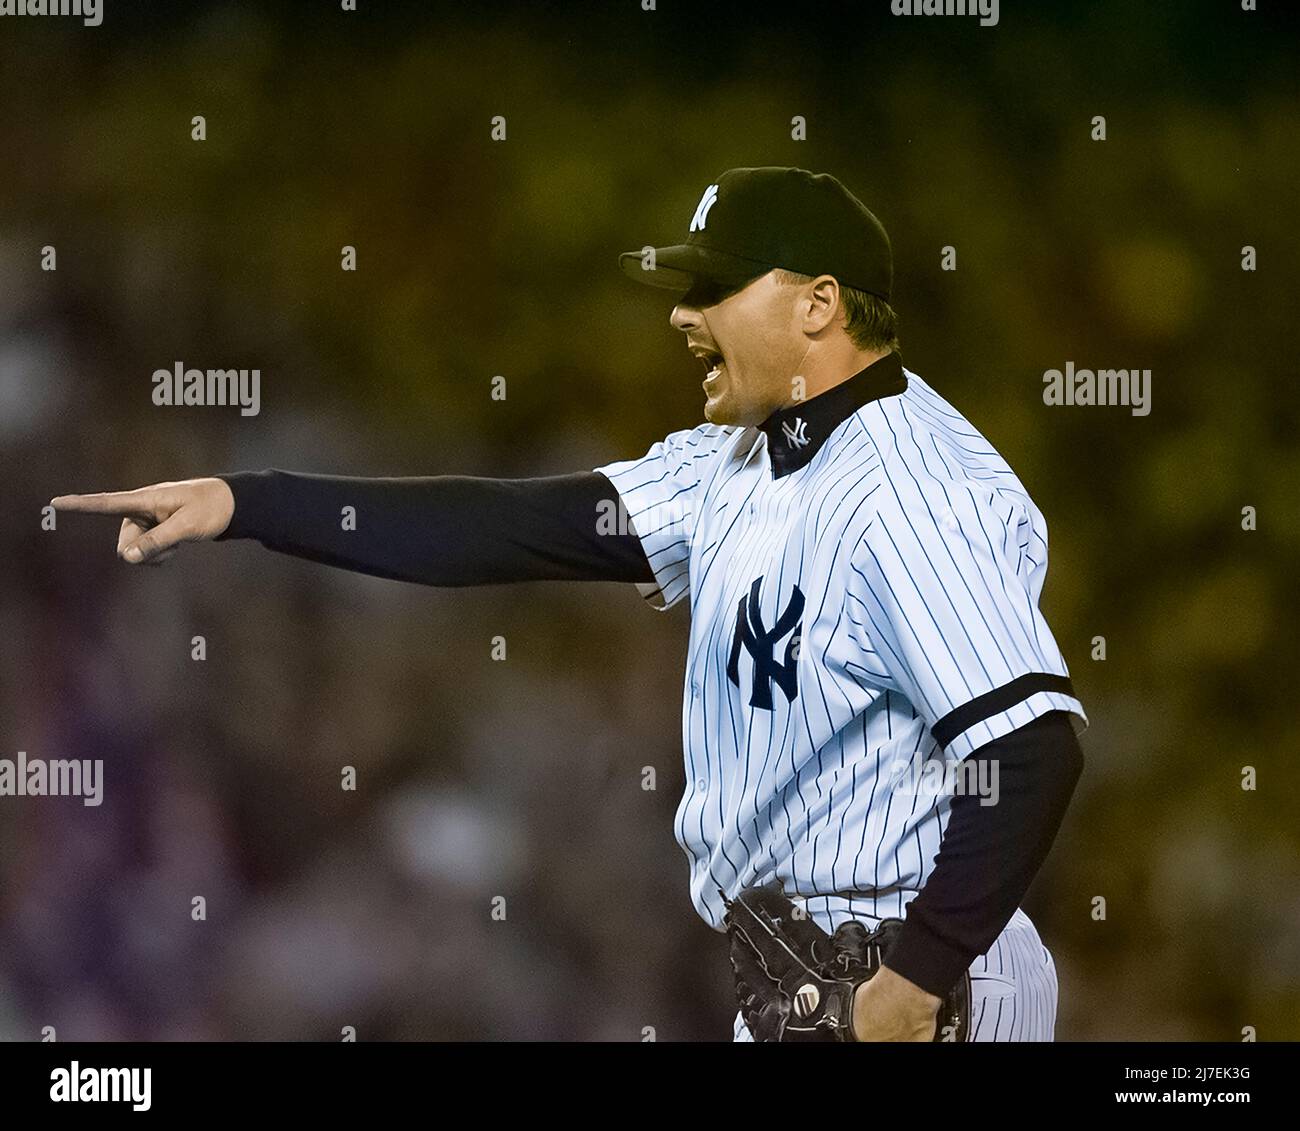 Yankees pitcher Roger Clemens points during a game against the Boston Red Sox on May 28, 2000 in New York. Photo credit: Francis Specker Stock Photo